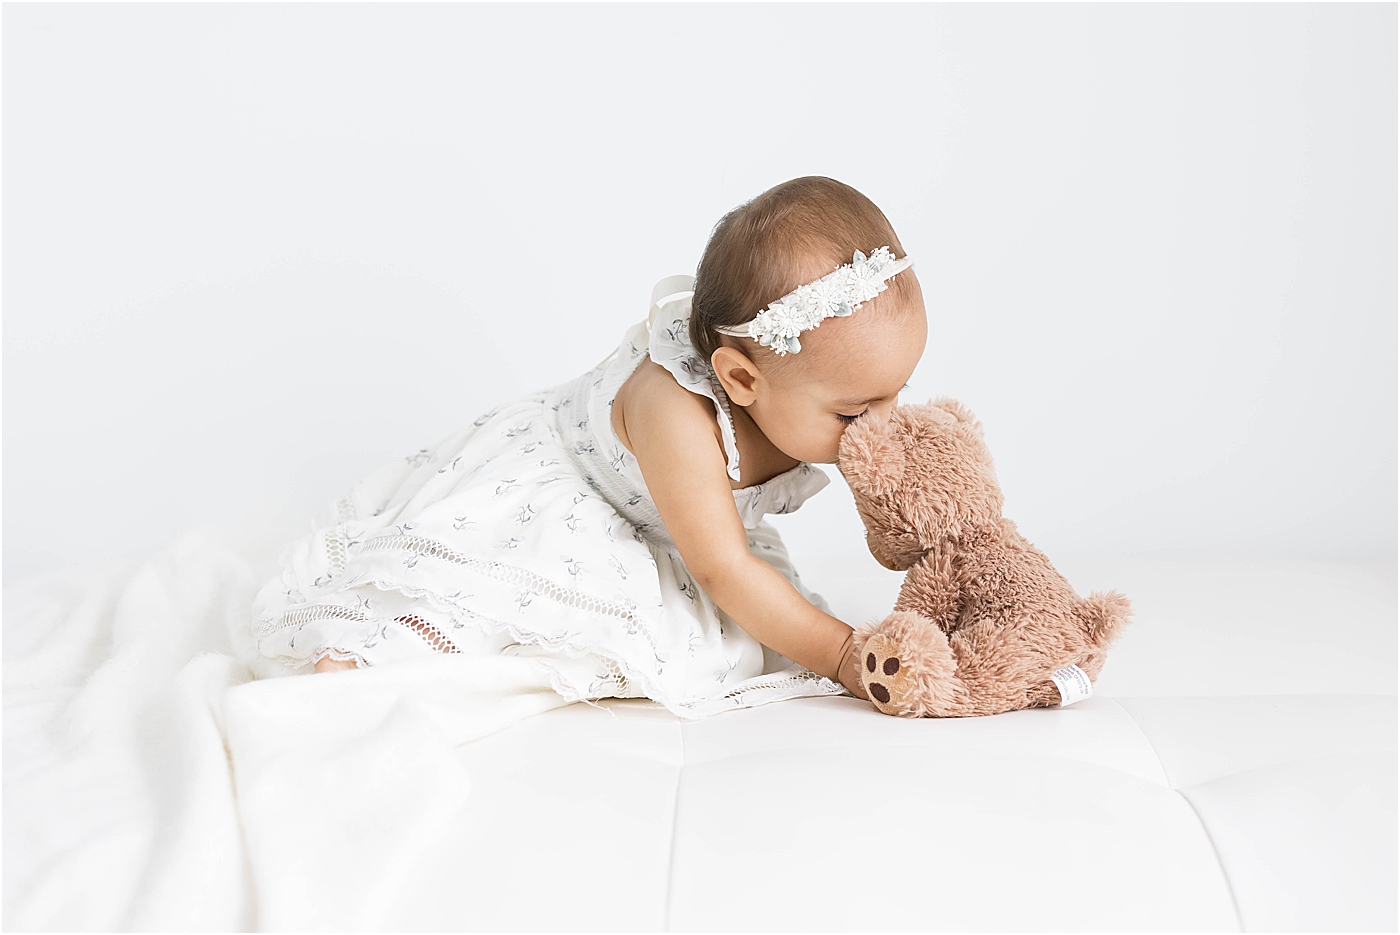 One year old with her teddy bear | Lindsay Konopa Photography